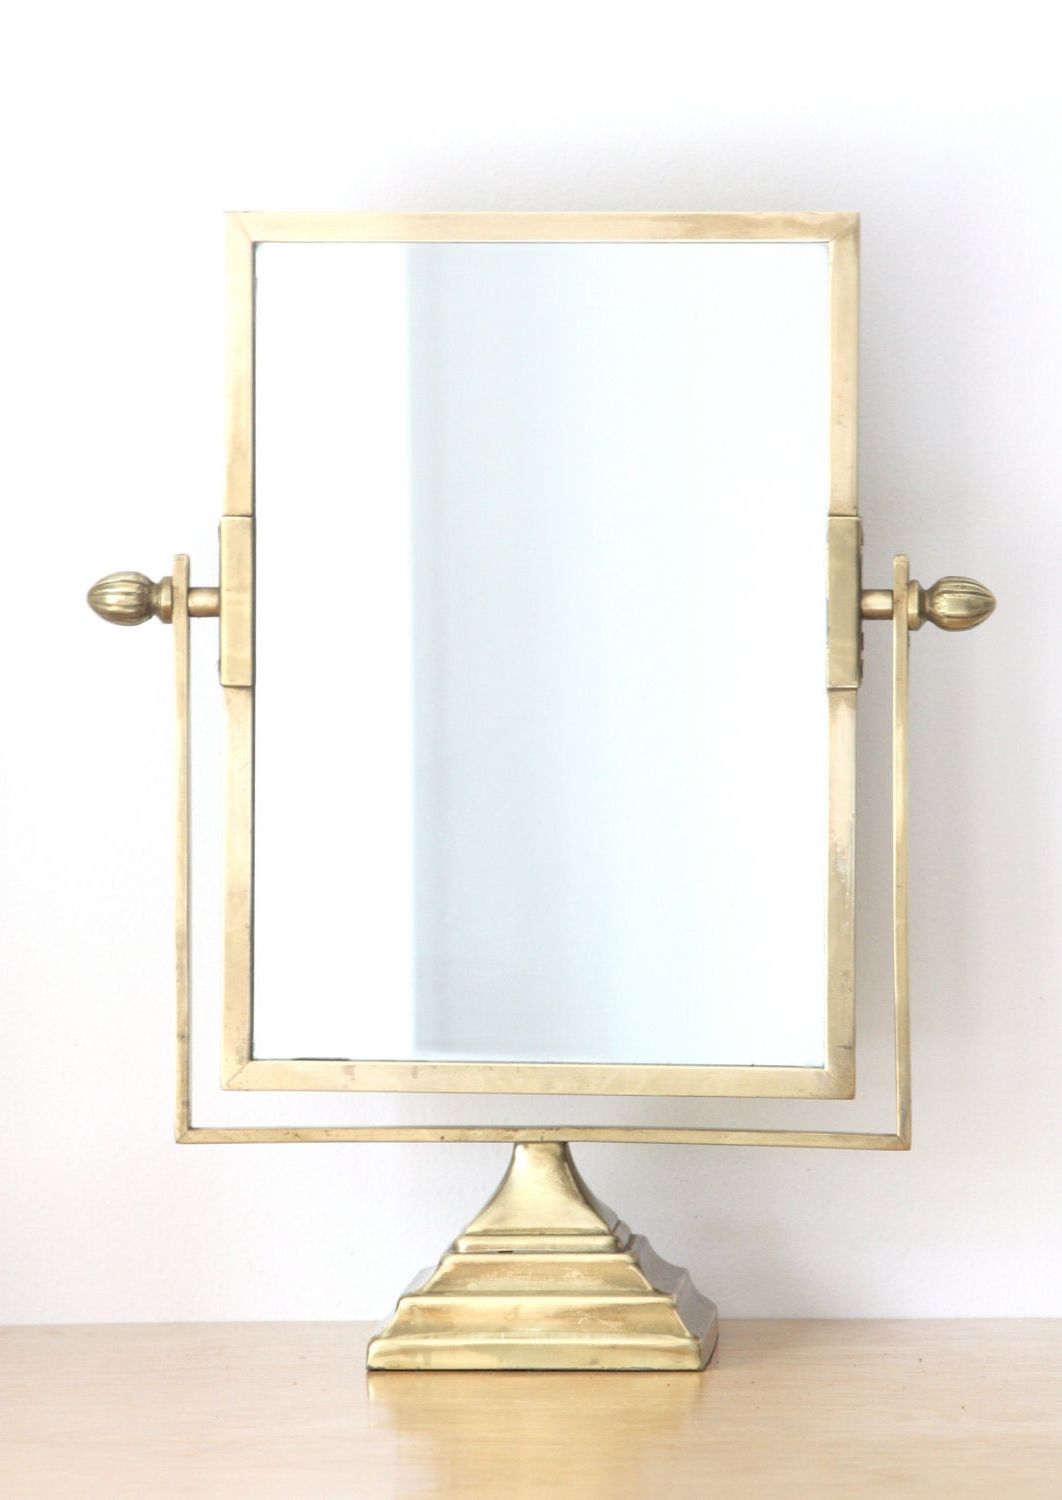 Large Antique Brass Pedestal Vanity Mirror Within Most Recently Released Aged Silver Vanity Mirrors (View 3 of 15)